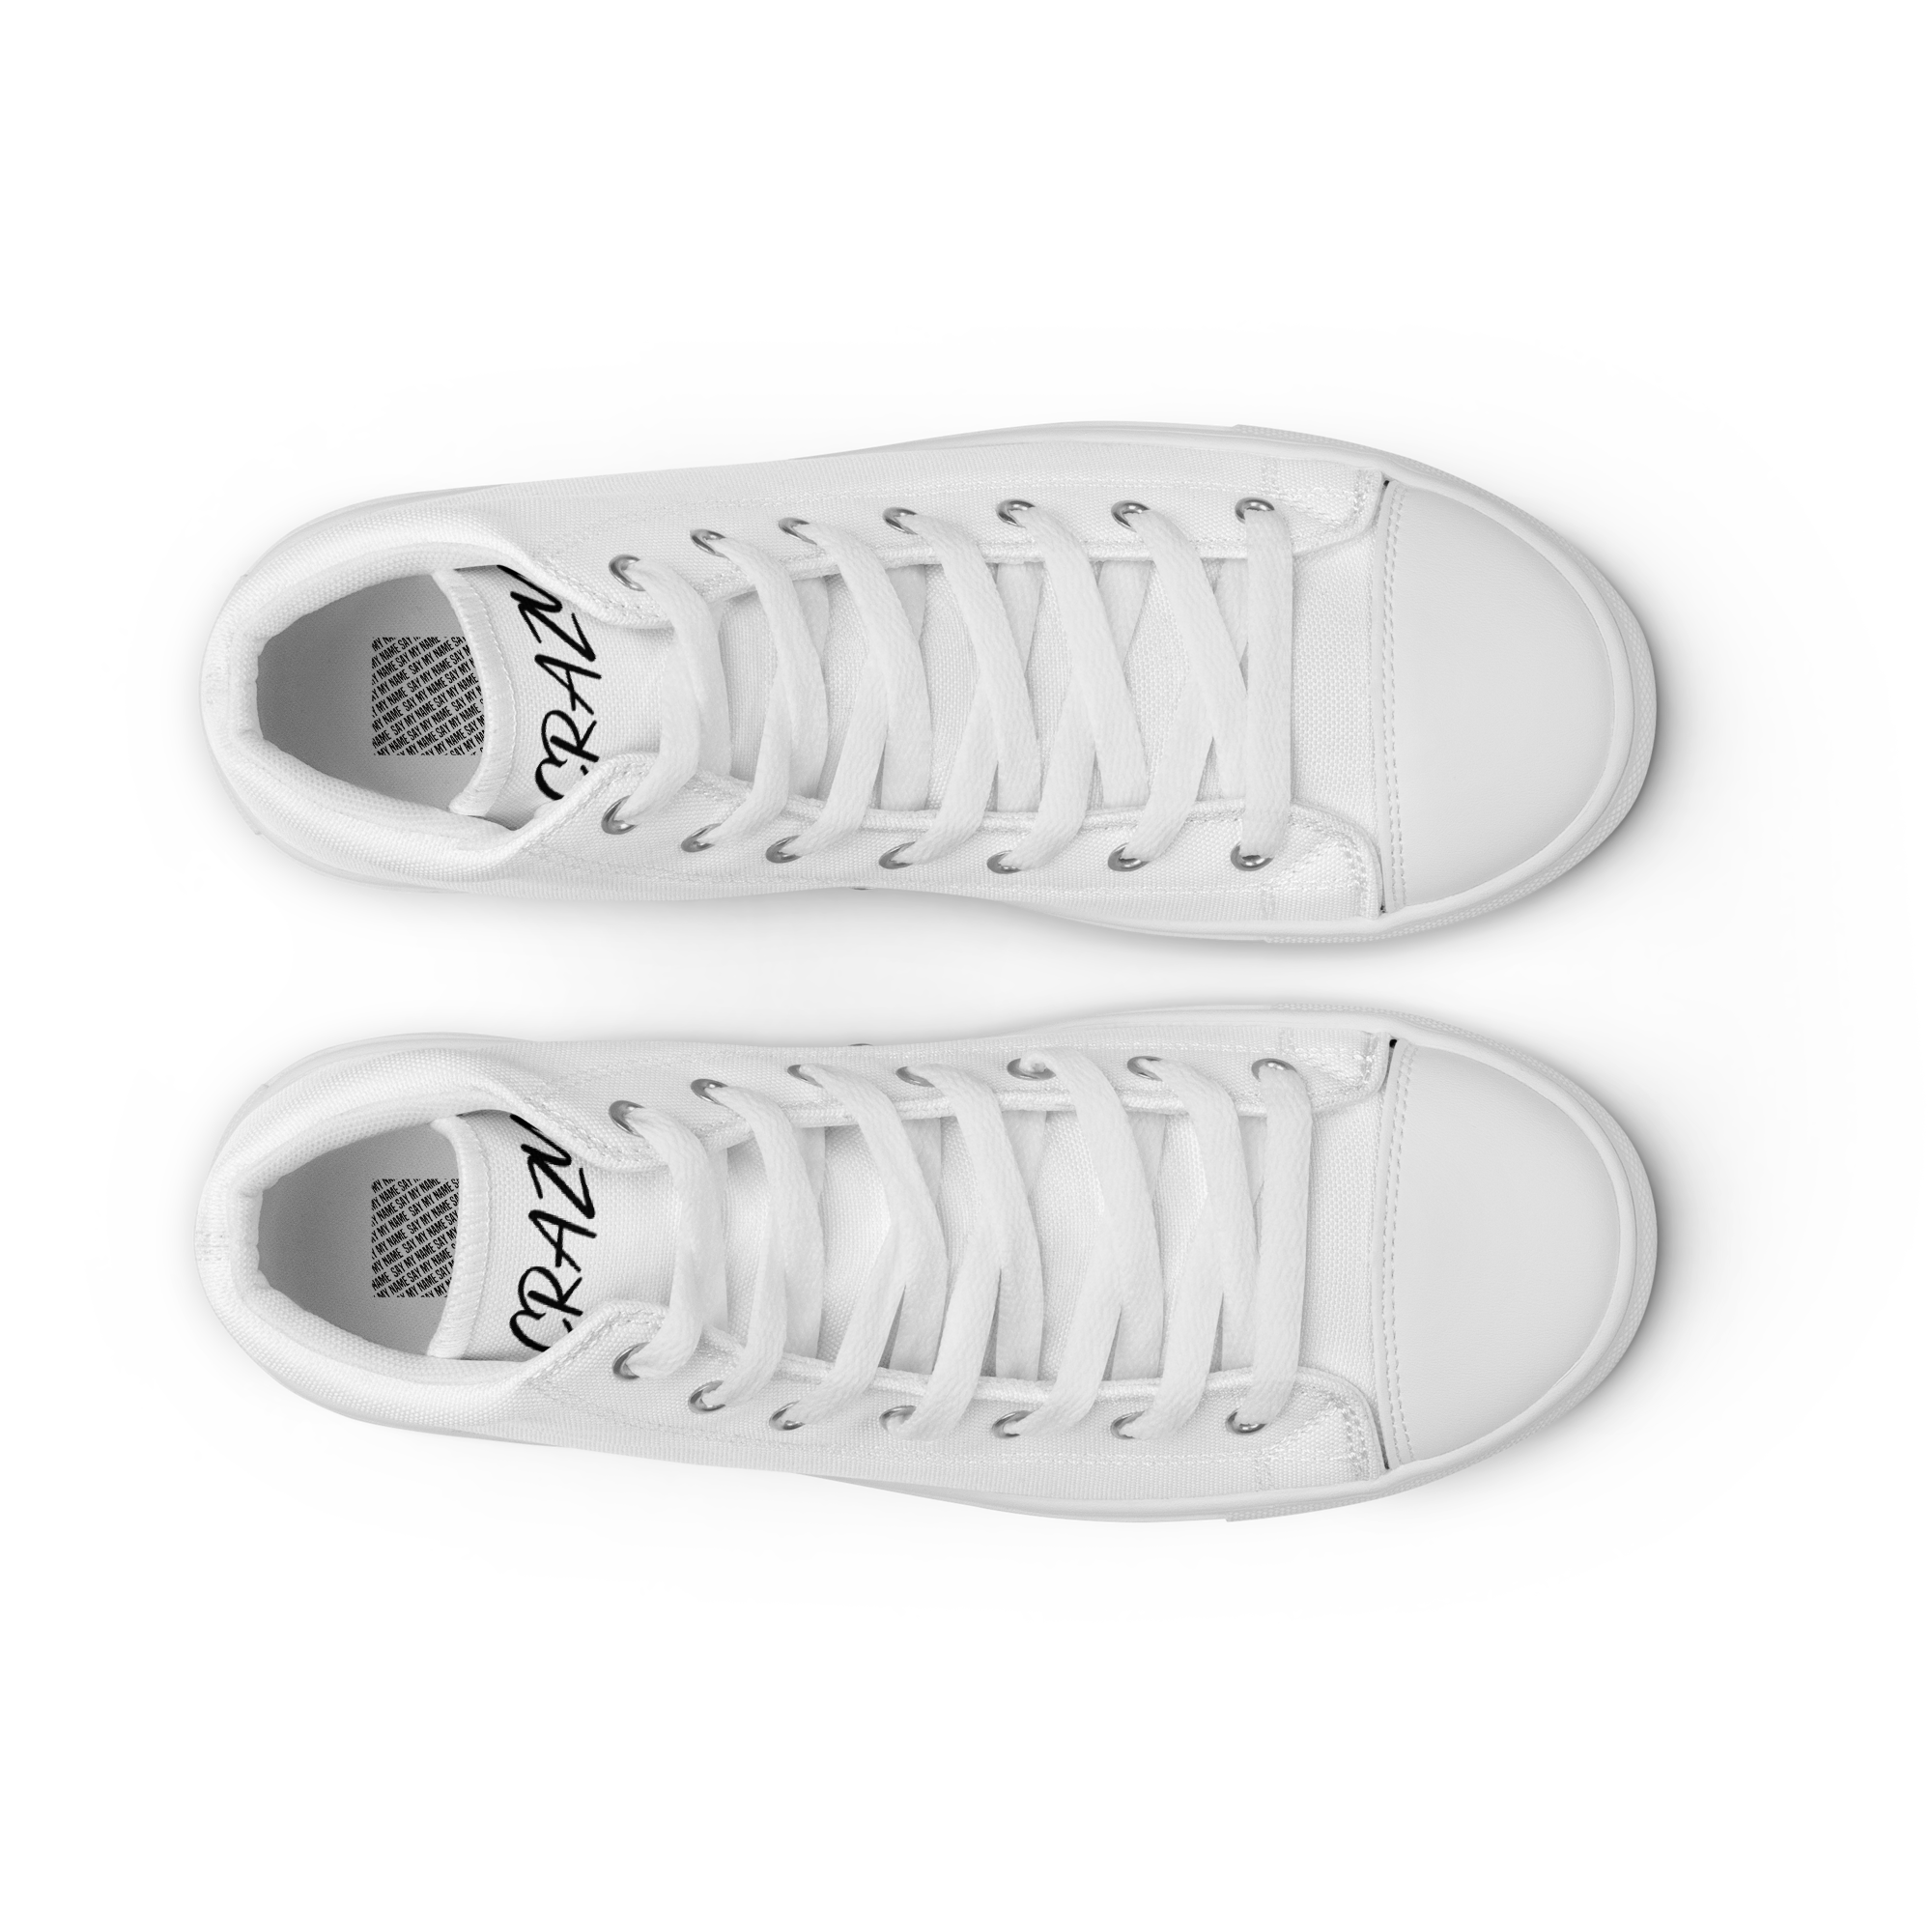 "SAY MY NAME" women's high white canvas sneakers